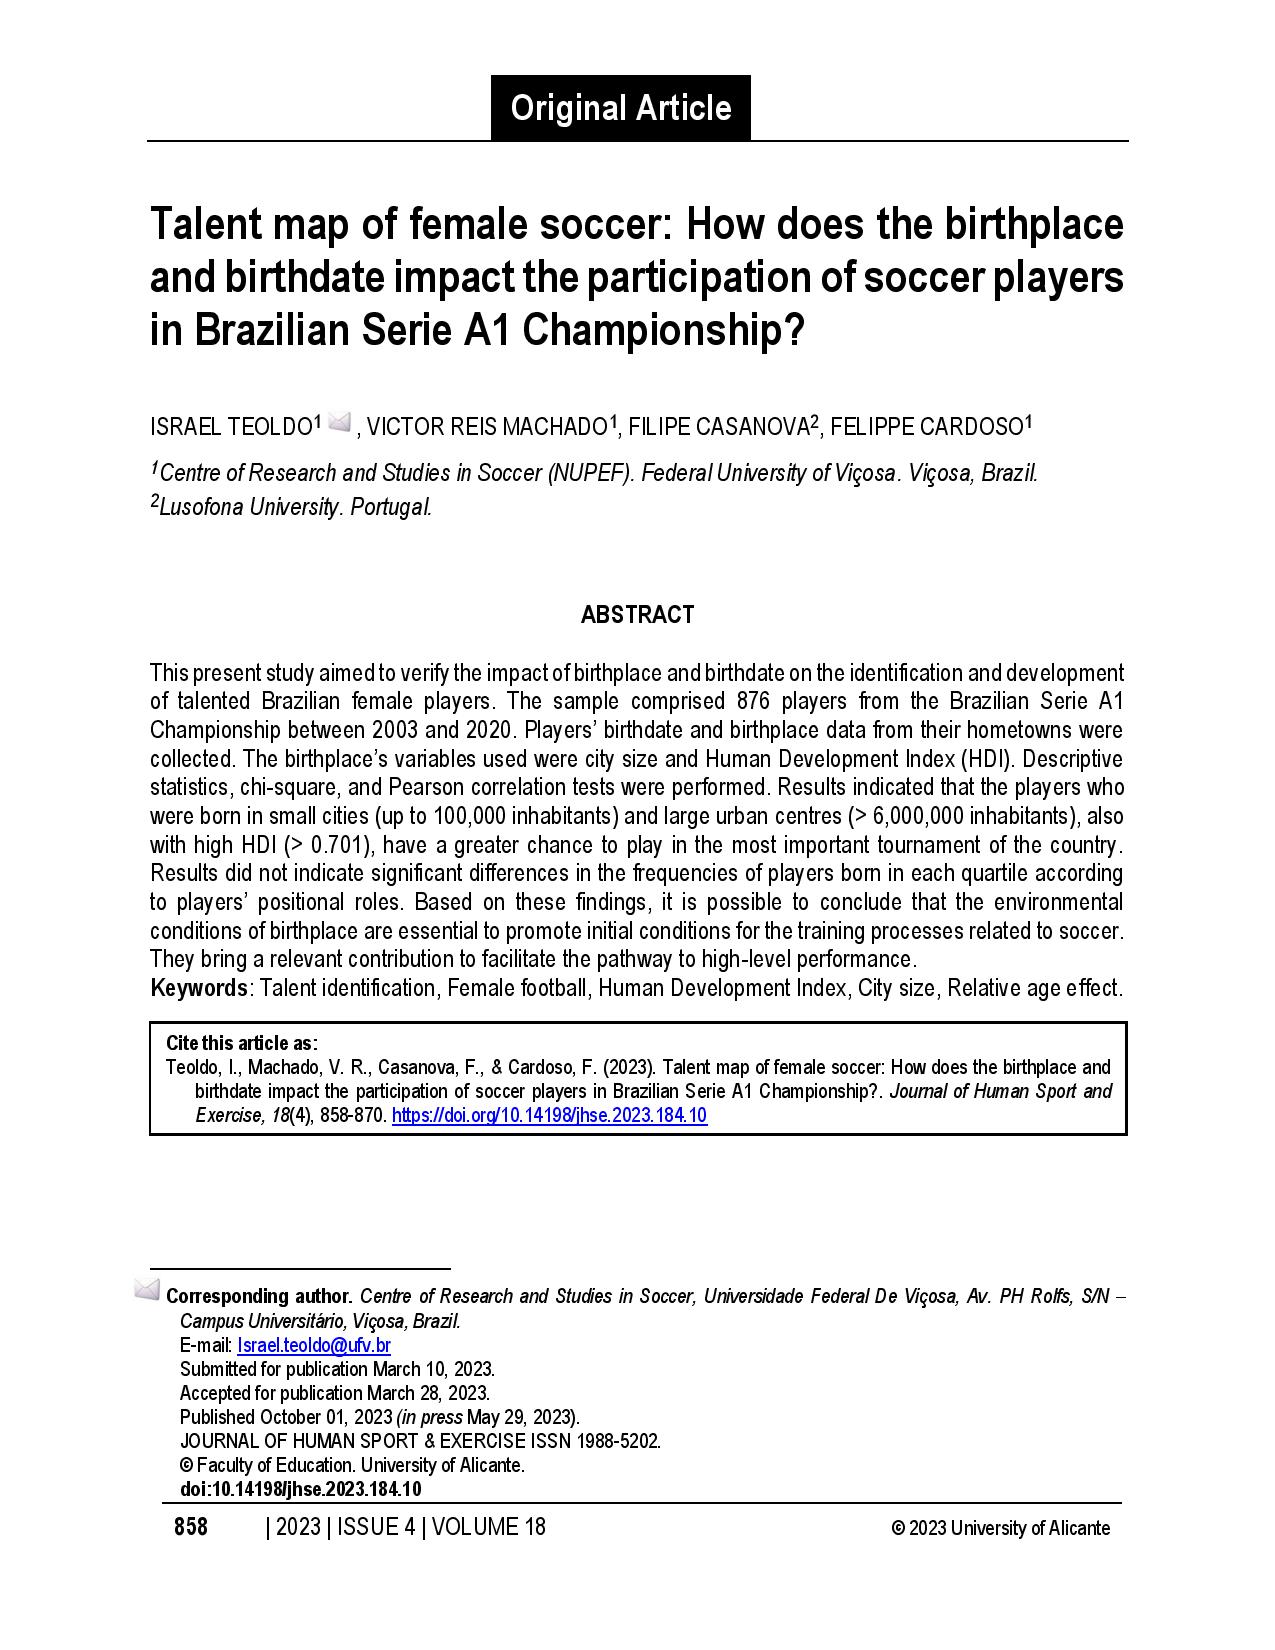 Talent map of female soccer: How does the birthplace and birthdate impact the participation of soccer players in Brazilian Serie A1 Championship?